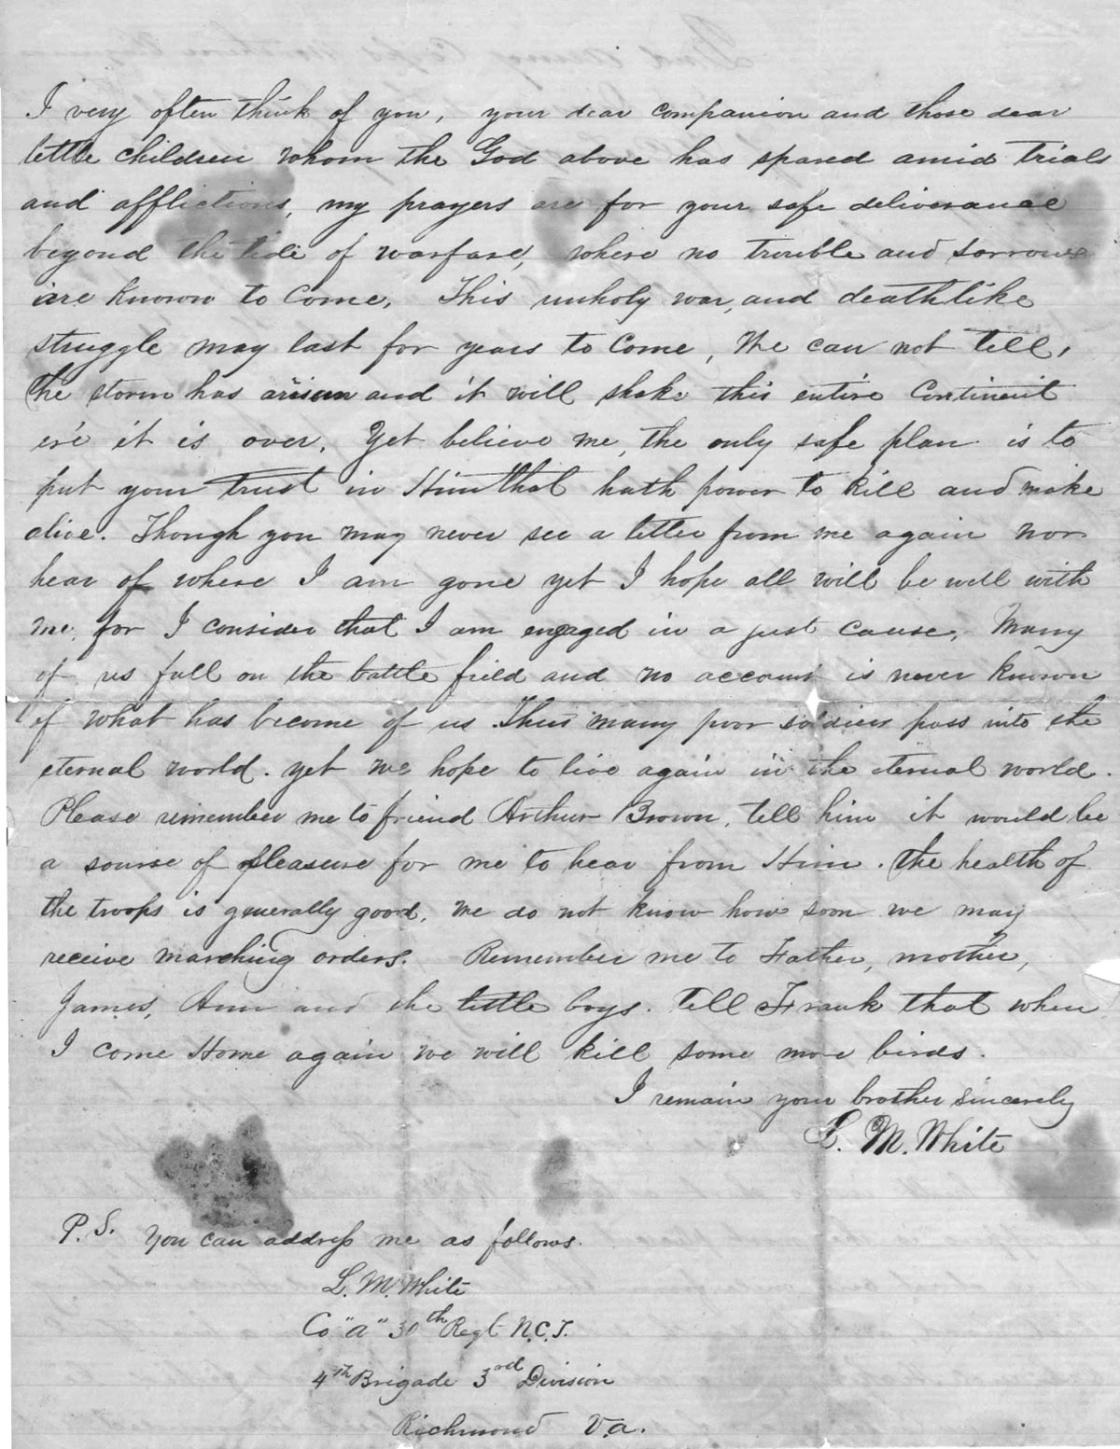 Wartime letter from Lalister M. White